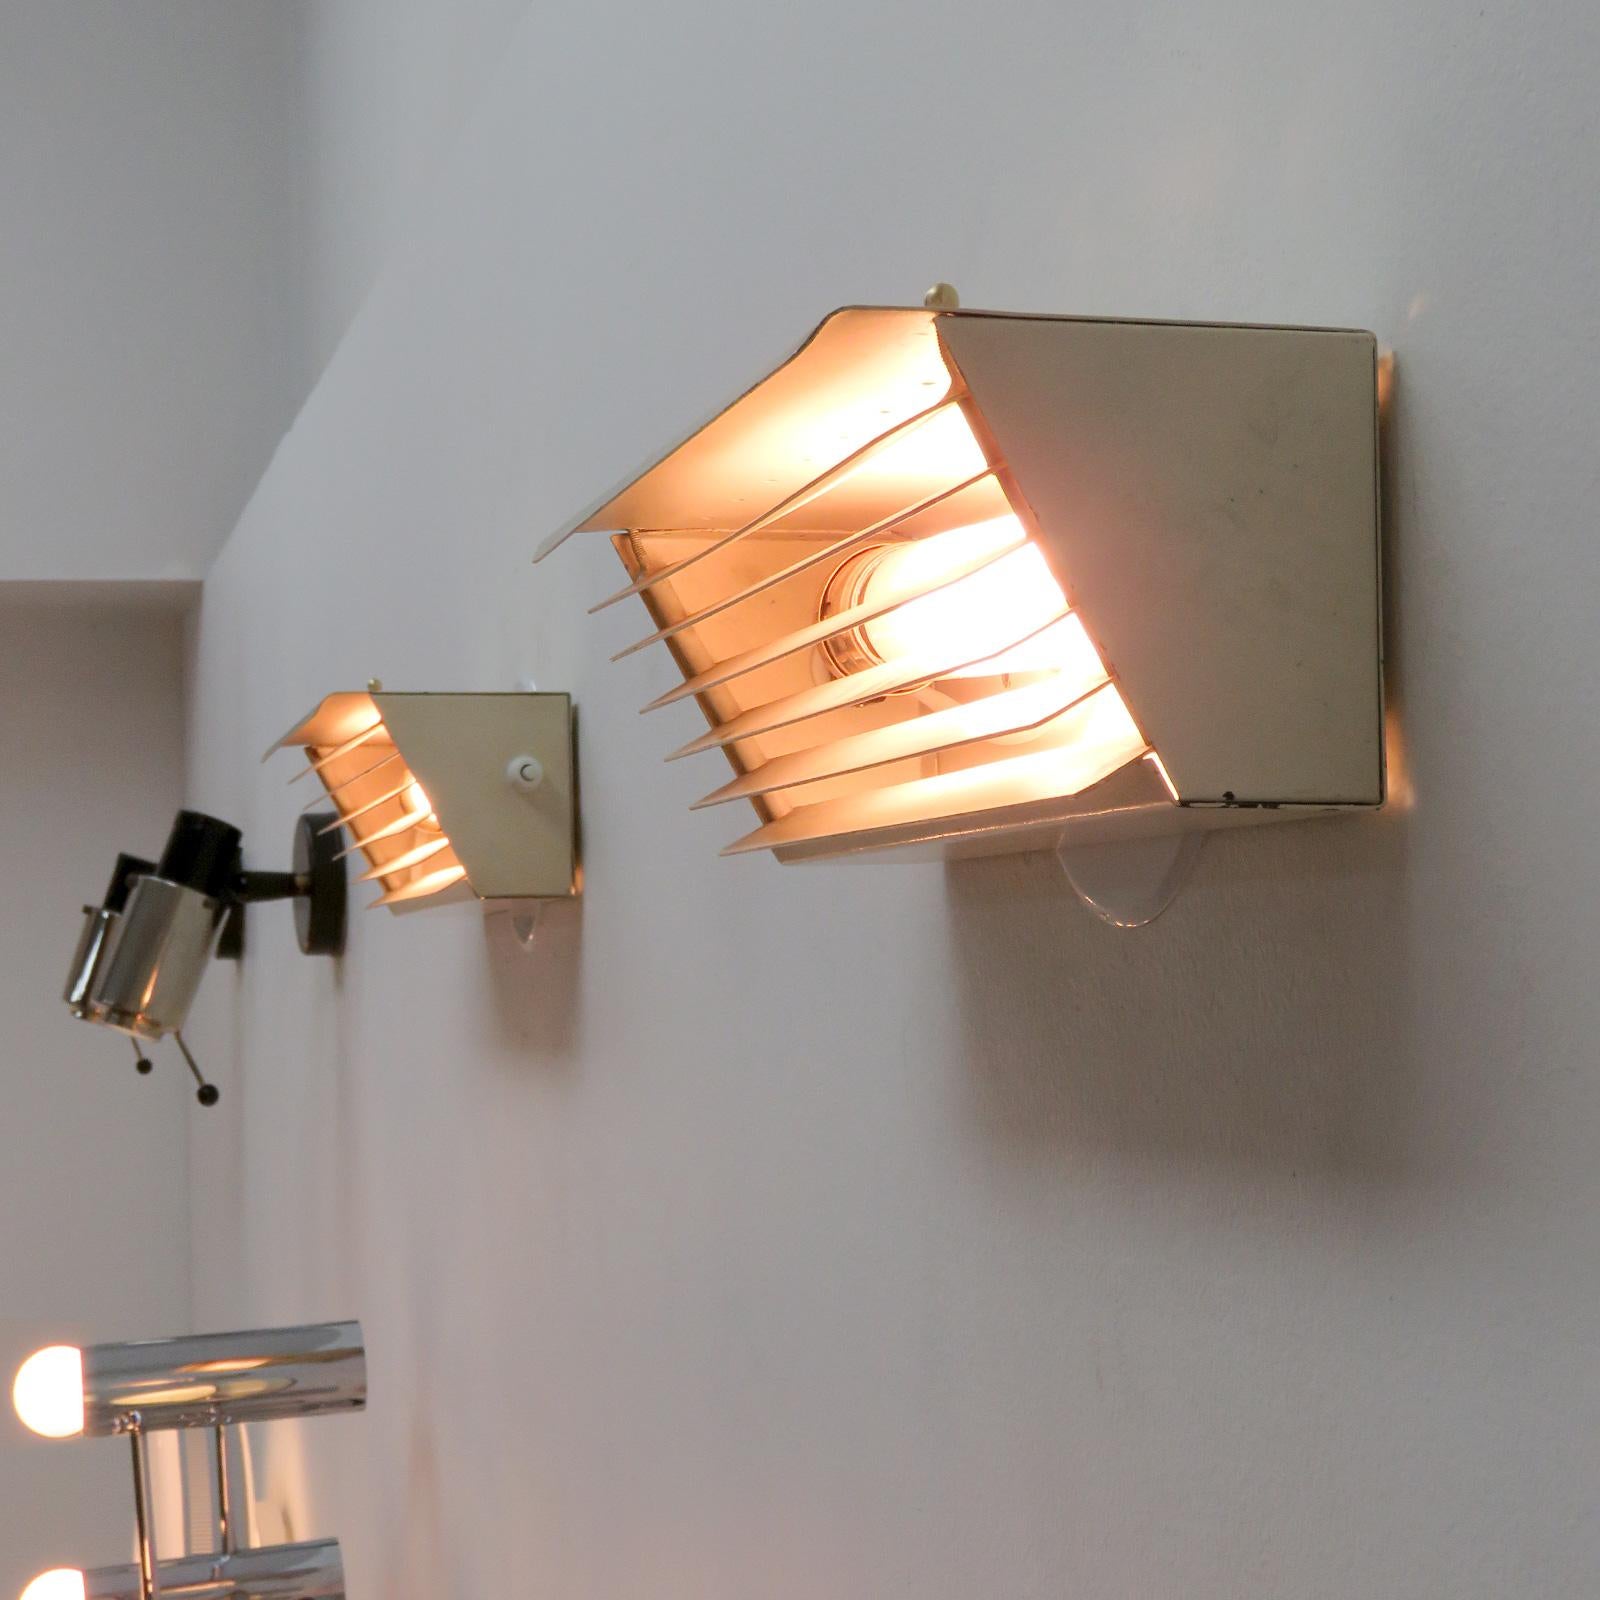 Brass Jacques Biny for Luminalite Edition Model '212' Wall Lights